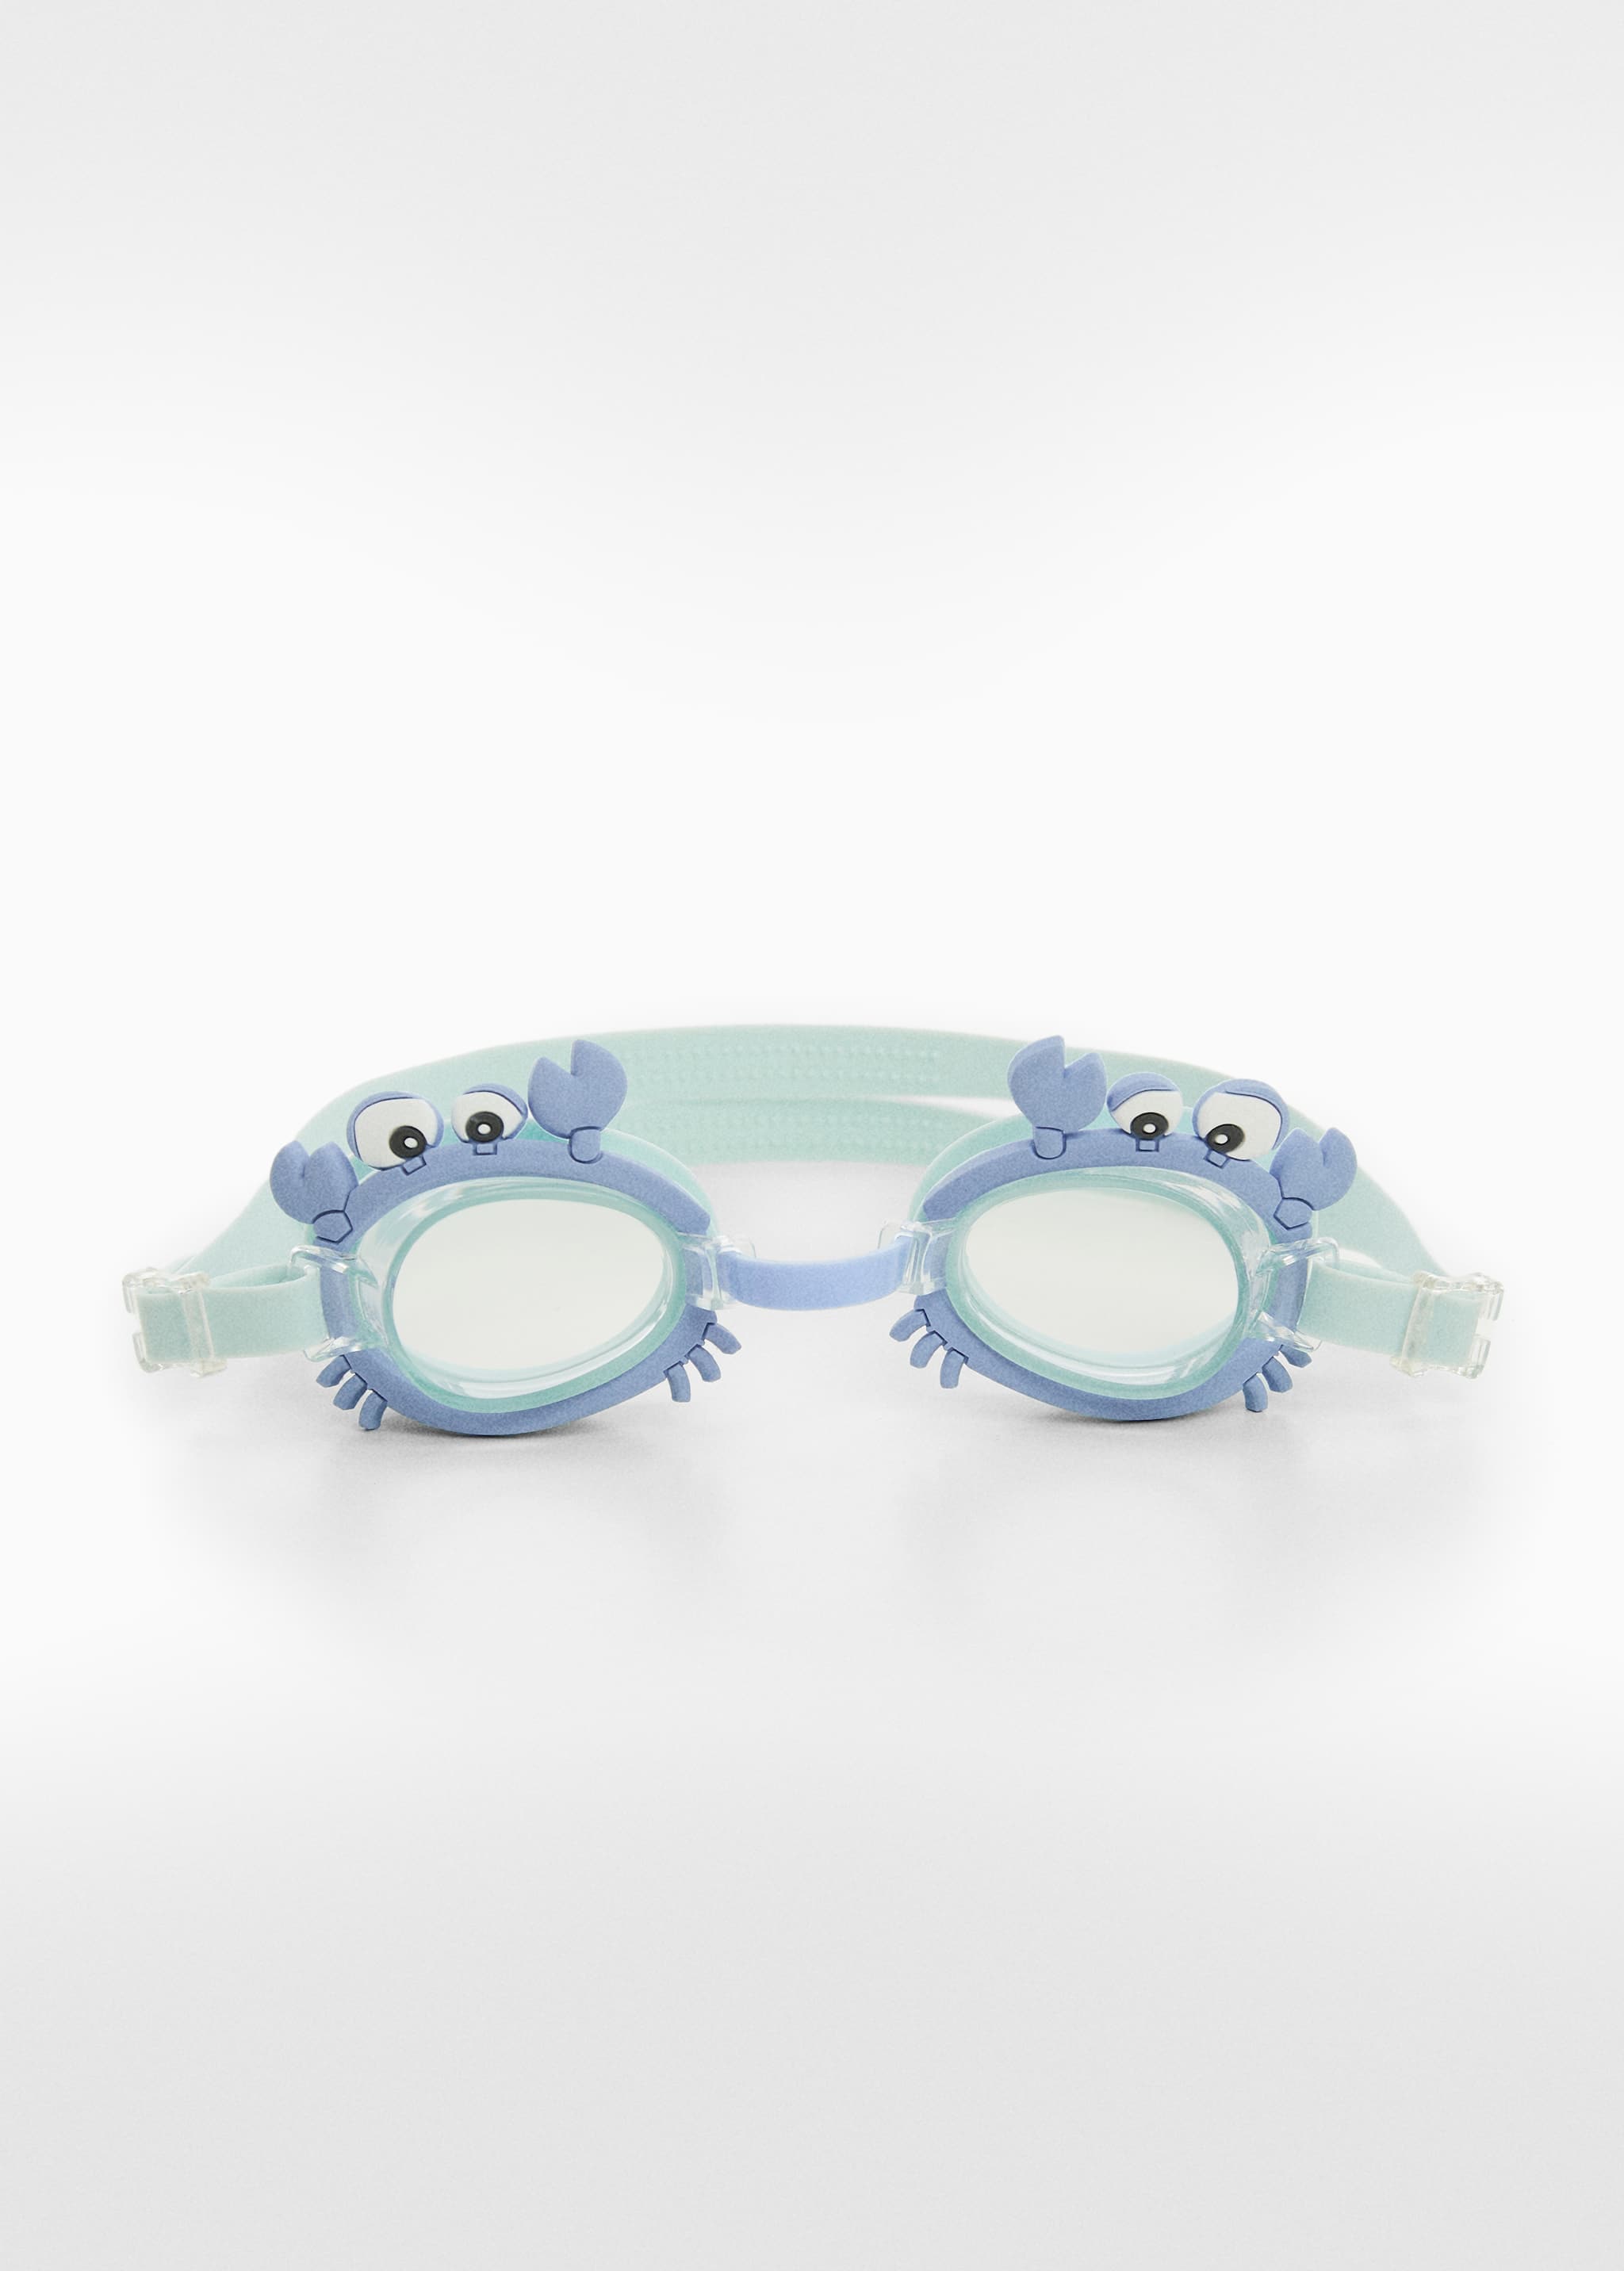 Crab swimming goggles - Article without model